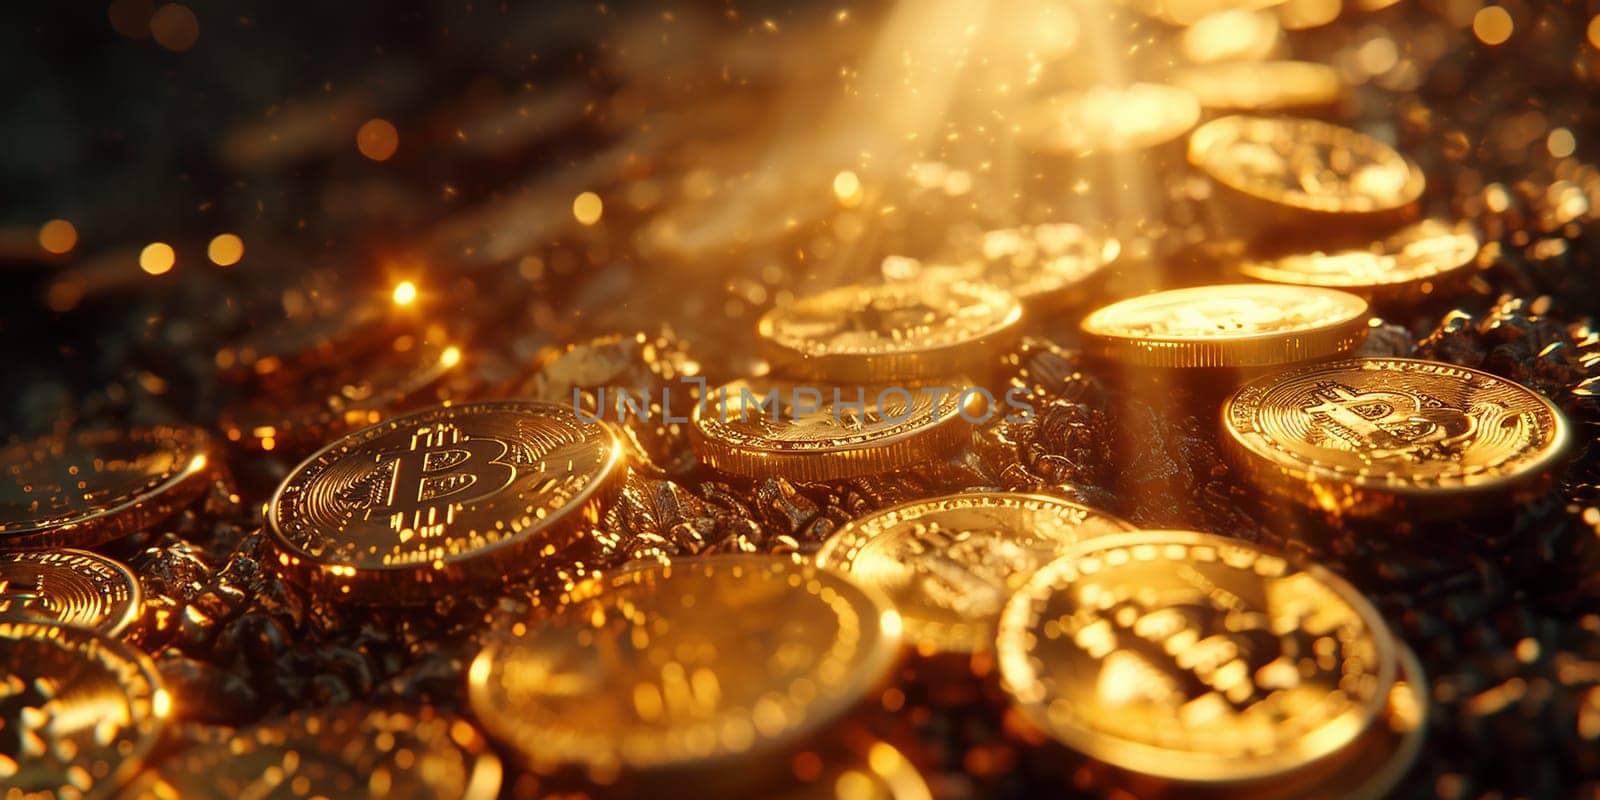 Golden bitcoin on yellow gold placer surface. Crypto currency. Bitcoin mining concept by Andelov13